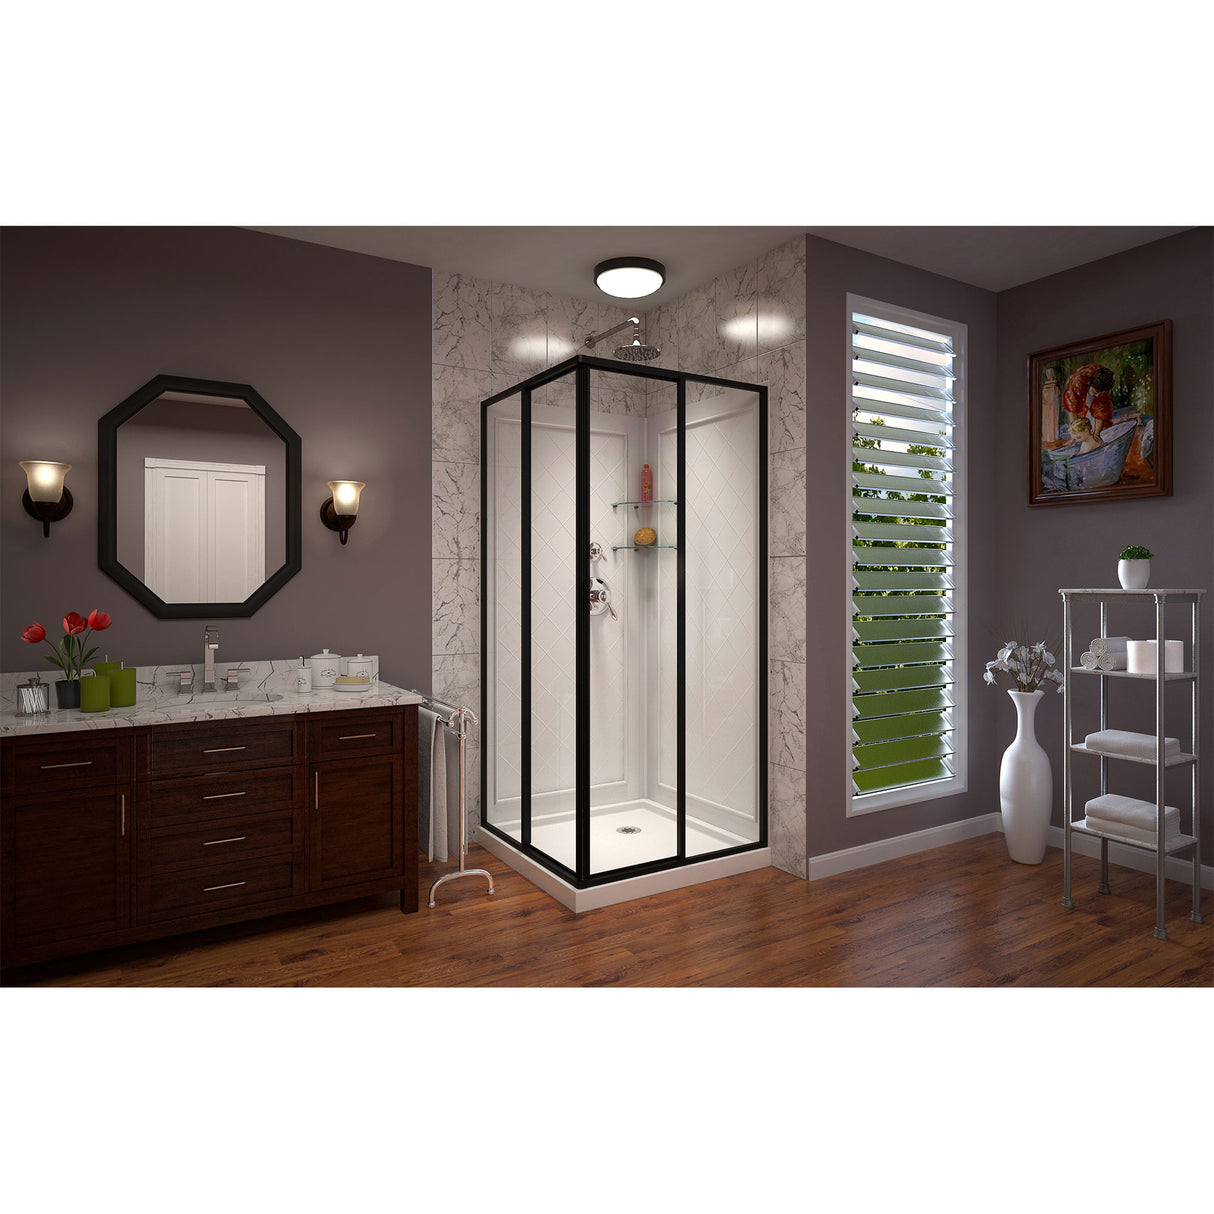 DreamLine Cornerview 36 in. D x 36 in. W Framed Sliding Shower Enclosure, Shower Base and Acrylic Wall Kit in Satin Black